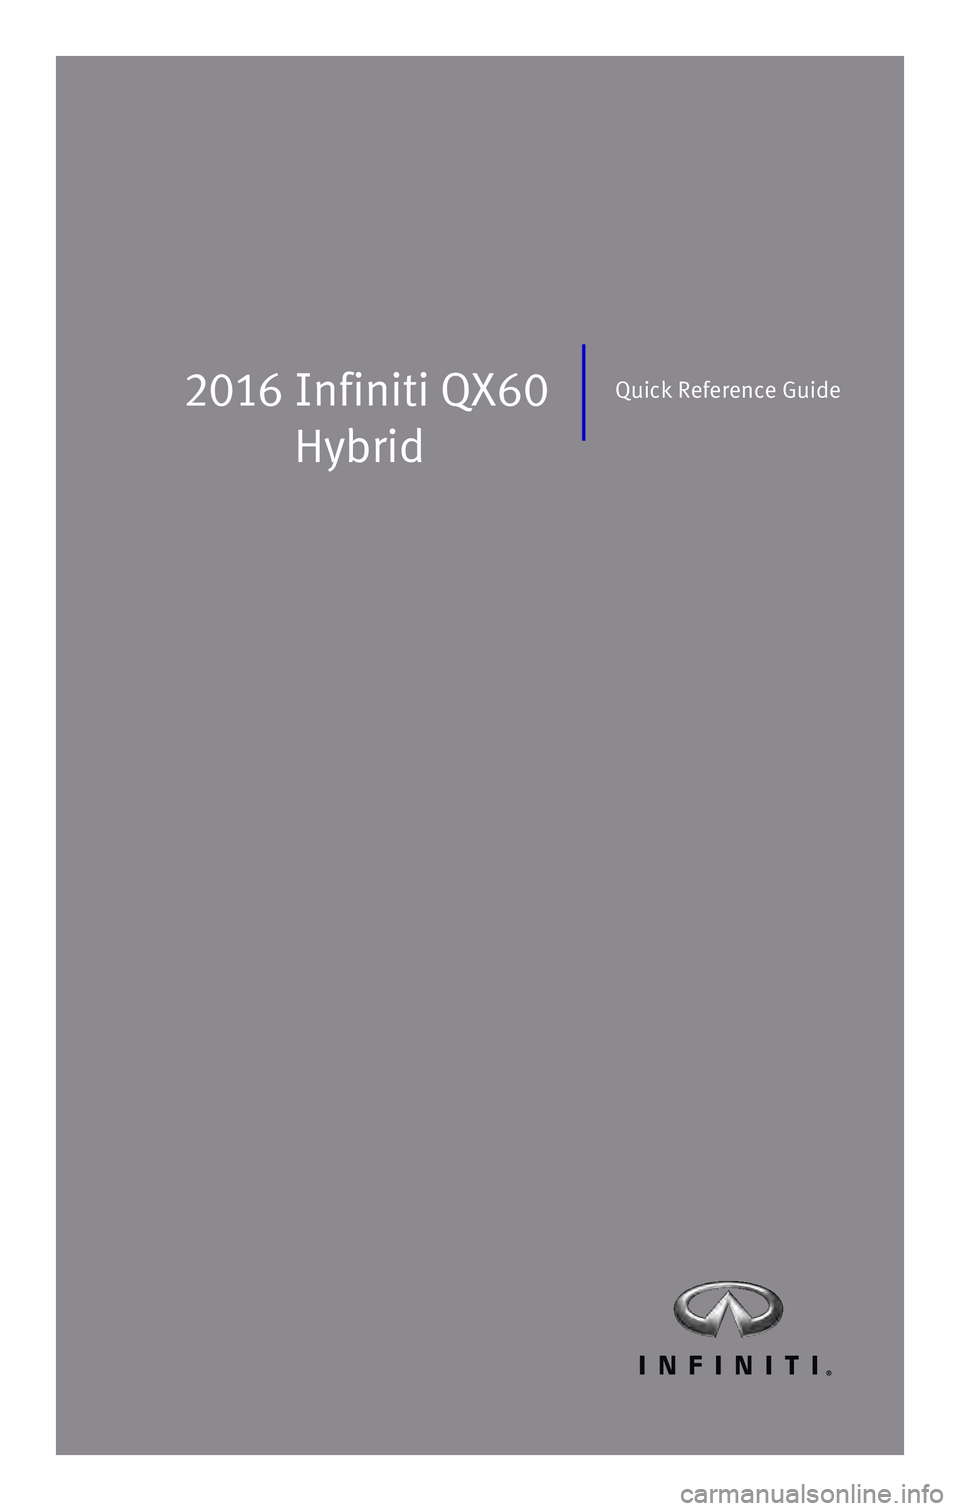 INFINITI QX60 HYBRID 2016  Quick Reference Guide 2016  Infiniti  QX60 
HybridQuick Reference Guide 